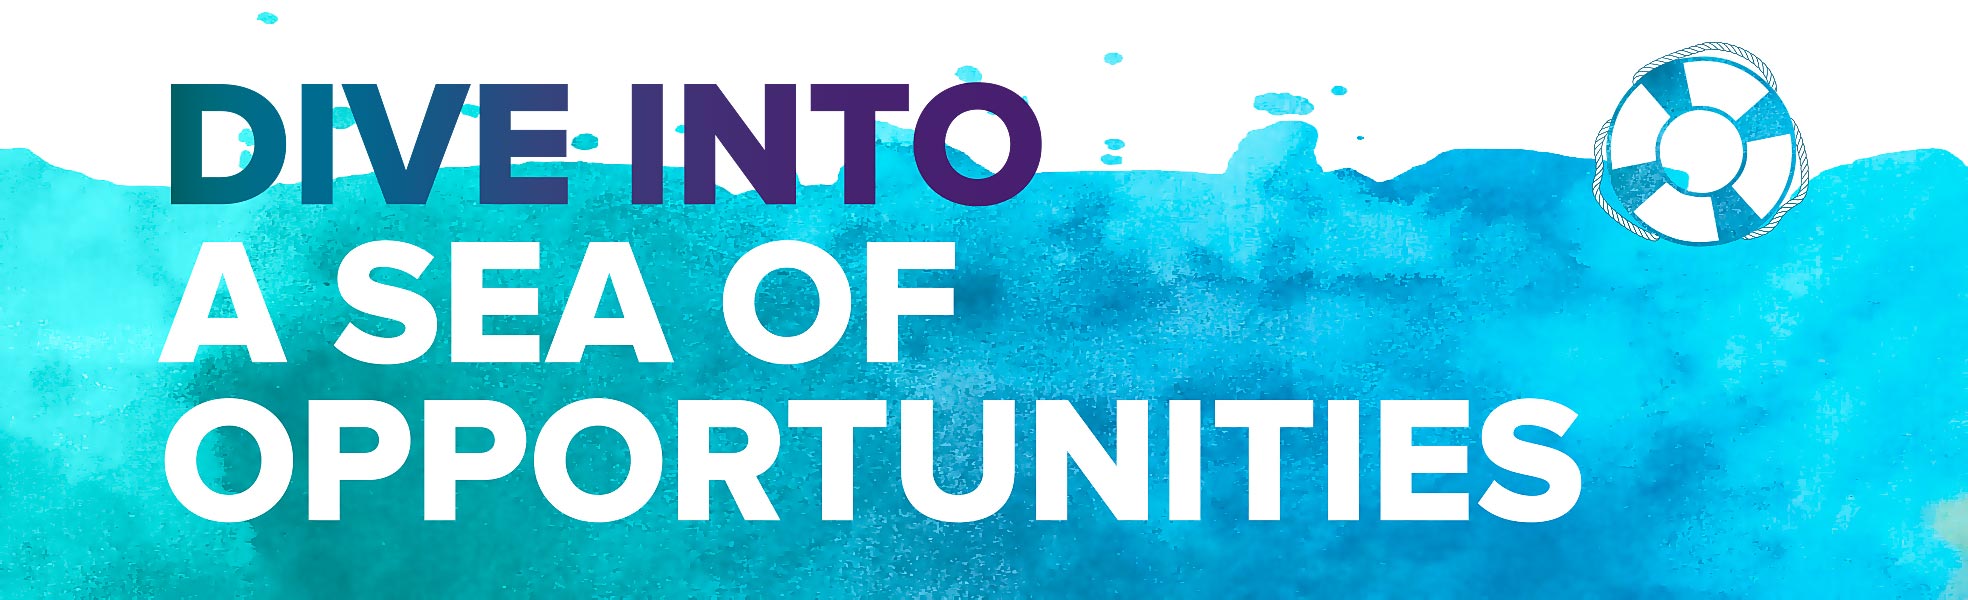 Dive into a sea of opportunities